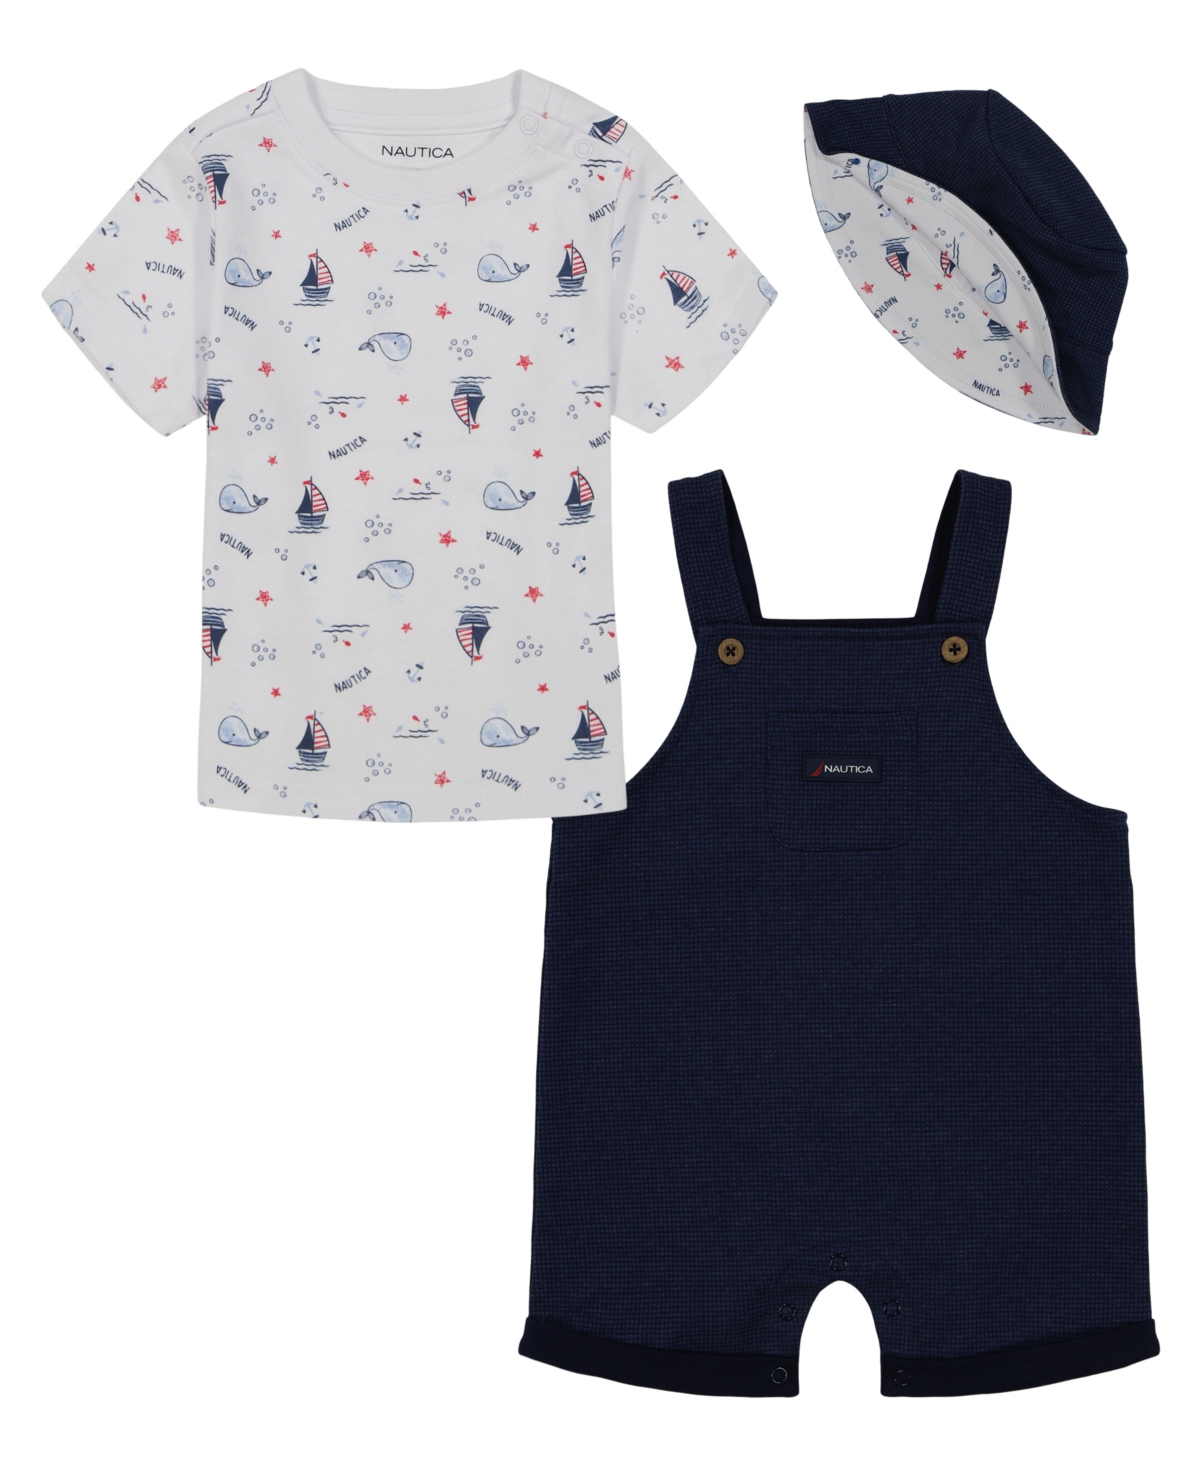 Nautica Baby Boys Short Sleeve Print T-shirt, Patterned French Terry Shortalls And Bucket Hat, 3-pc Set In Navy